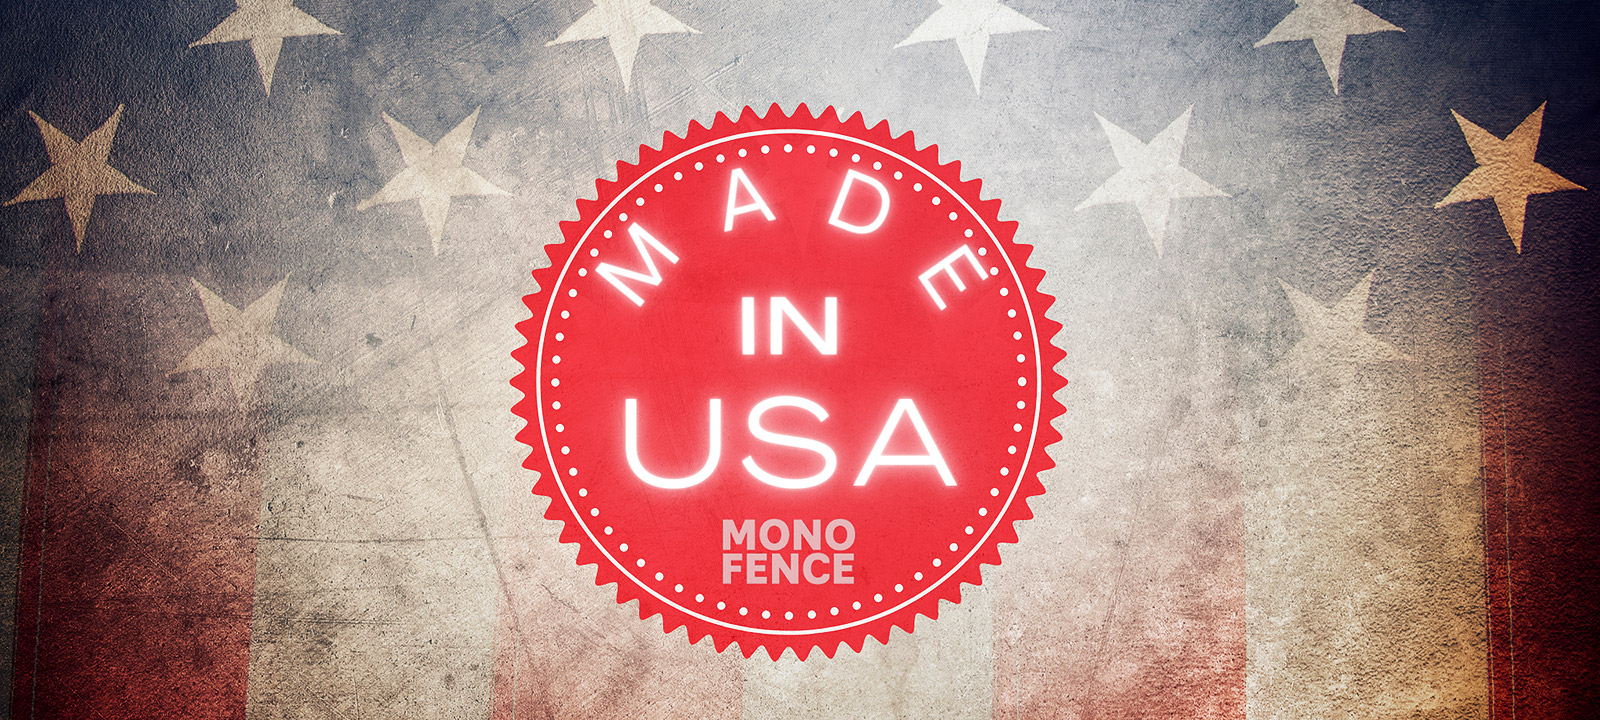 MONO Fence, Made in USA